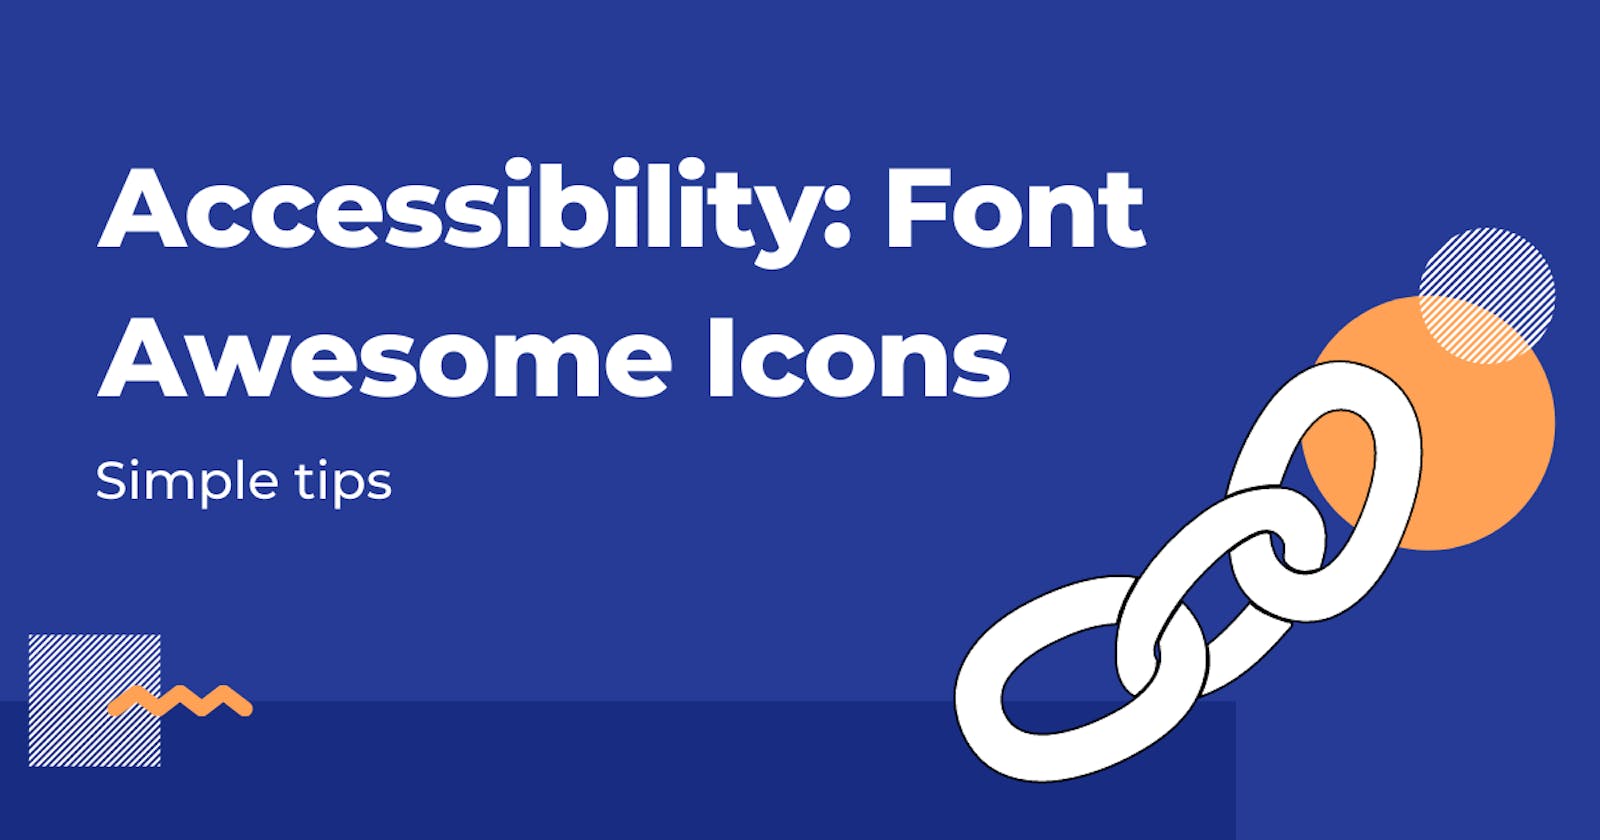 How to make Font Awesome icons accessible